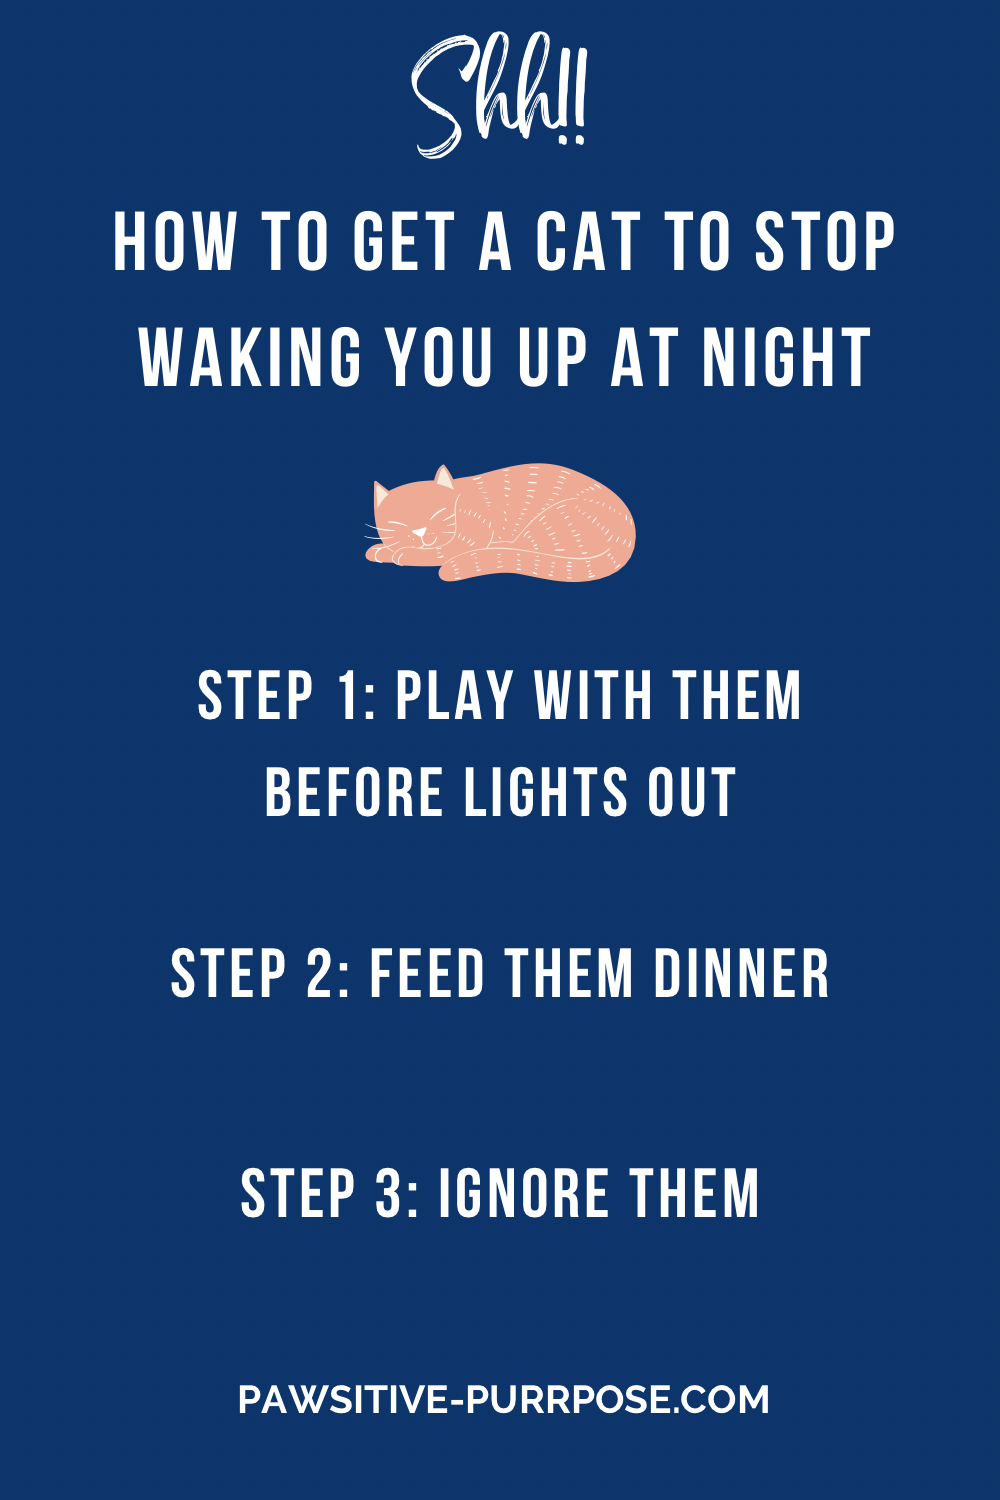 List of ways to get a cat to stop waking you up at night